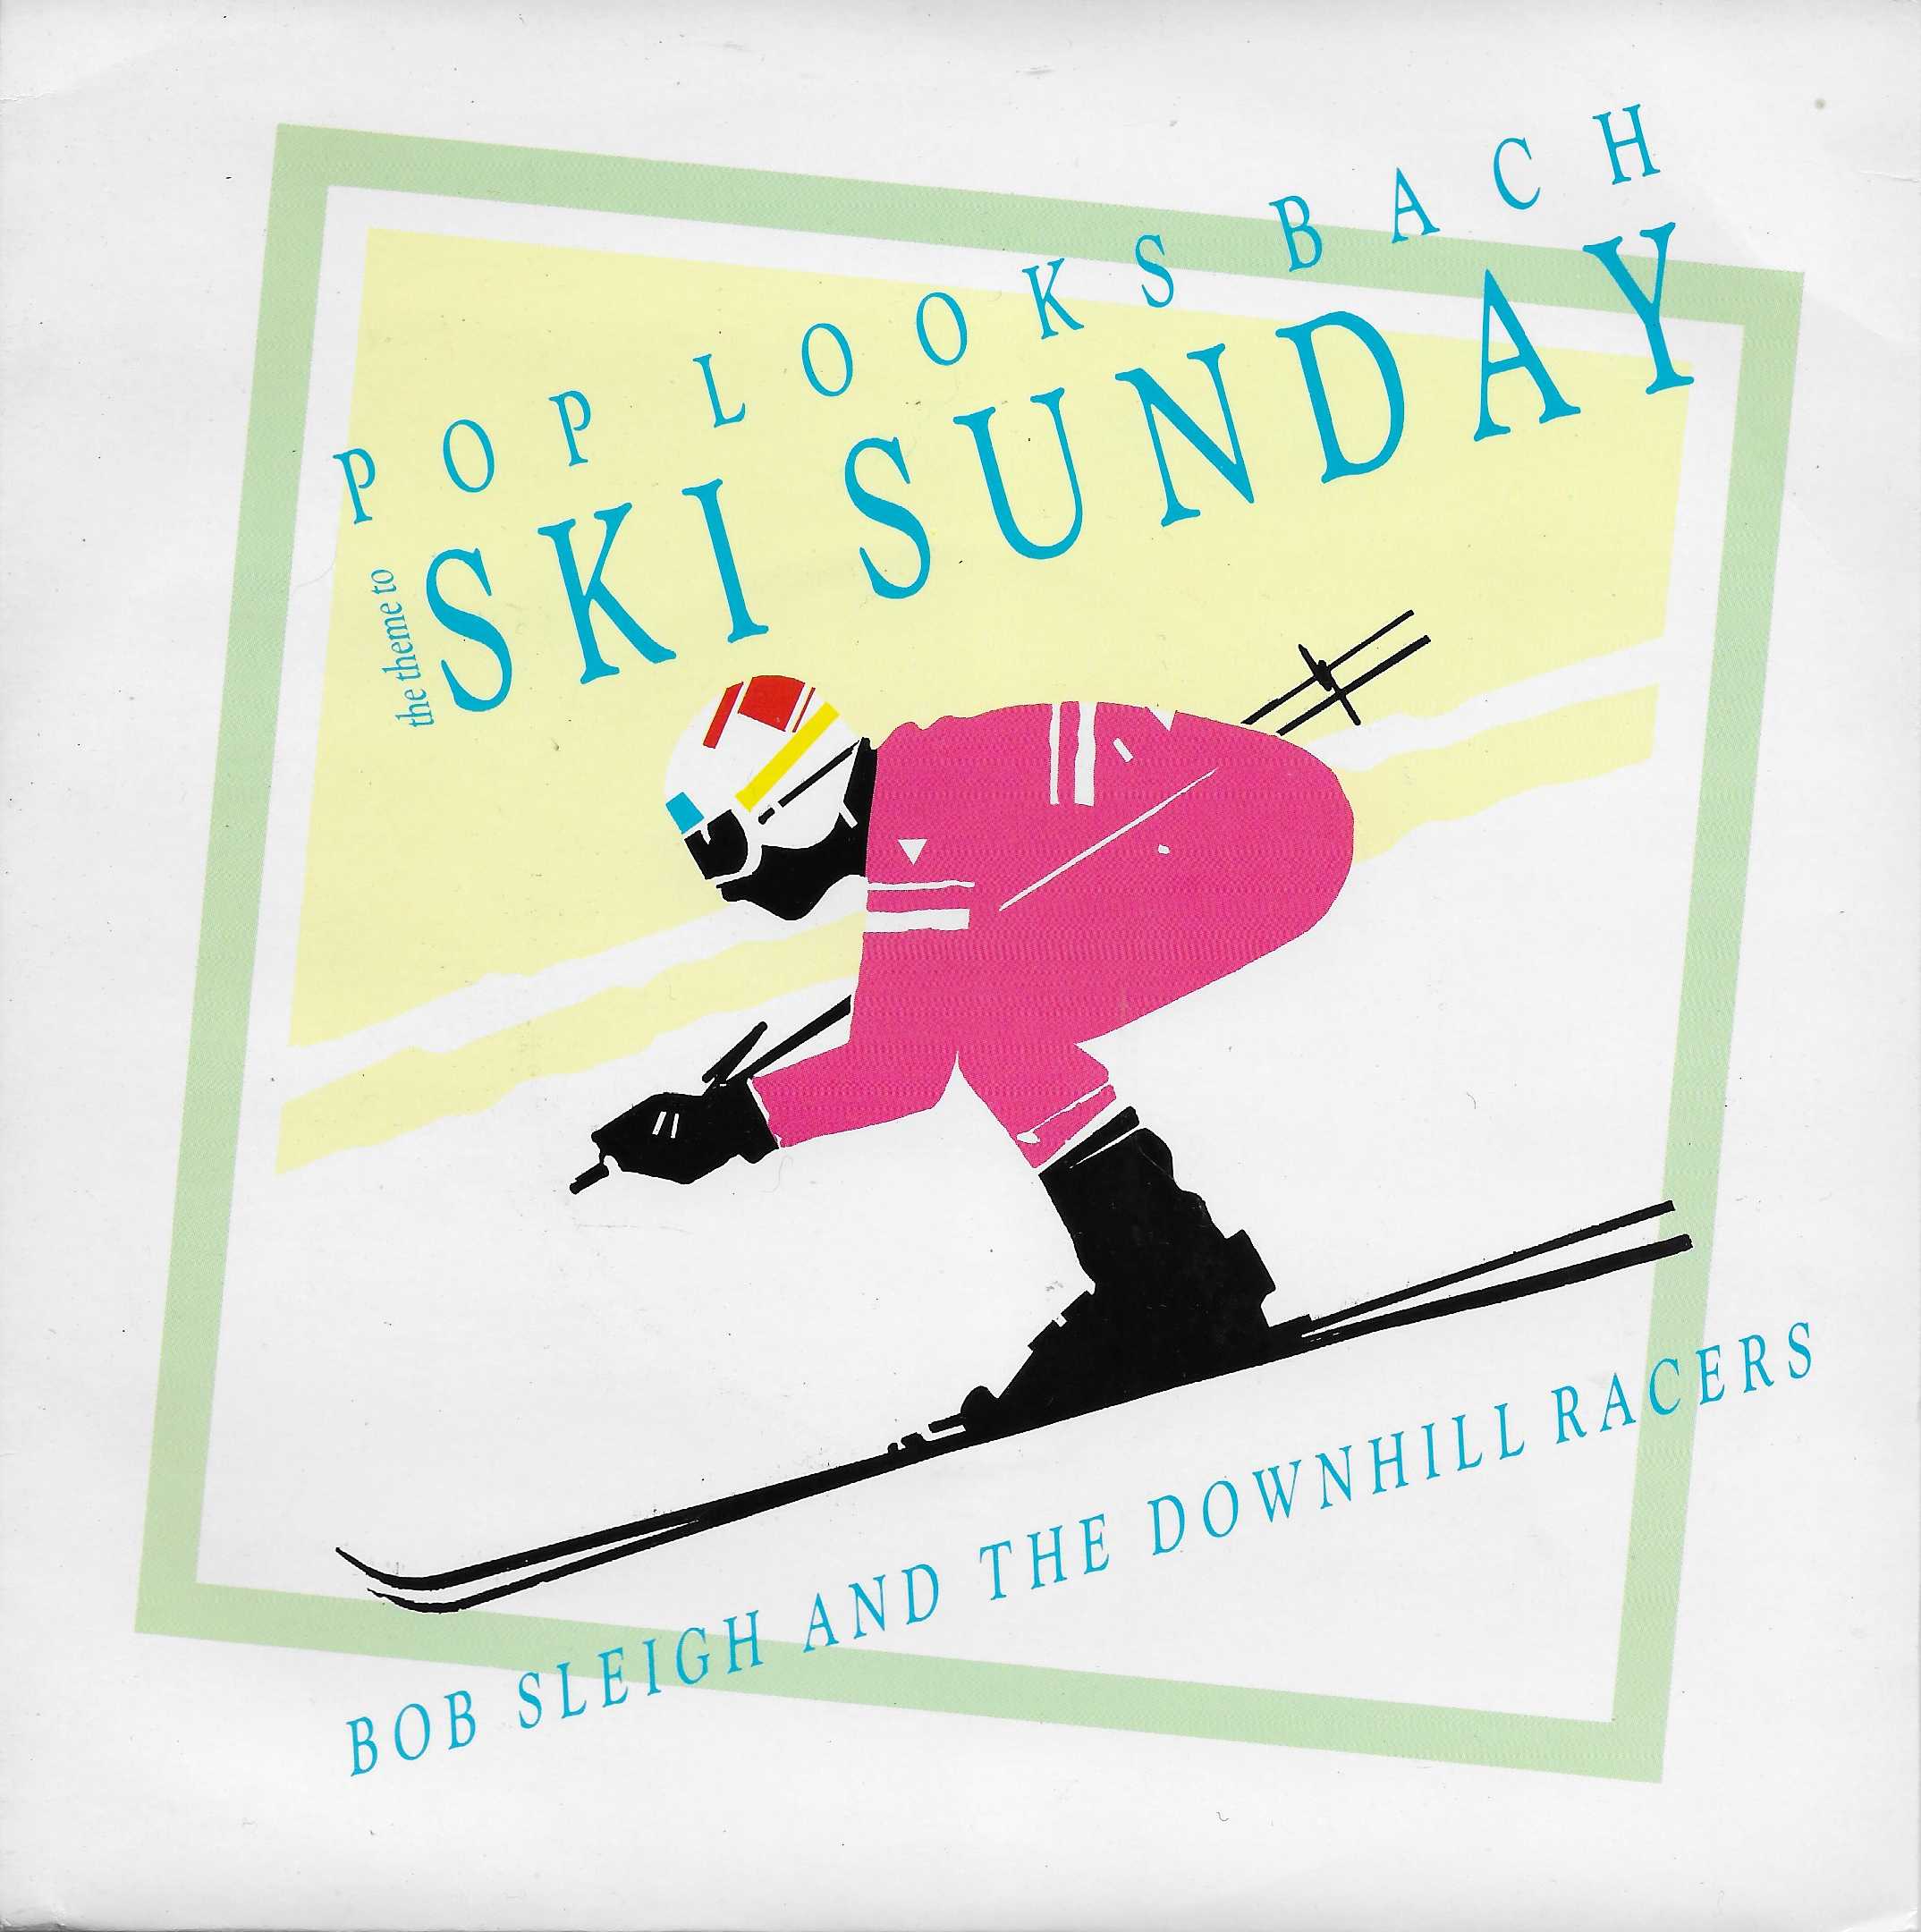 Picture of 109 791 Pop looks Bach (Ski Sunday) by artist San Fonteyn / Bob Sleigh and the Downhill Racers from the BBC records and Tapes library